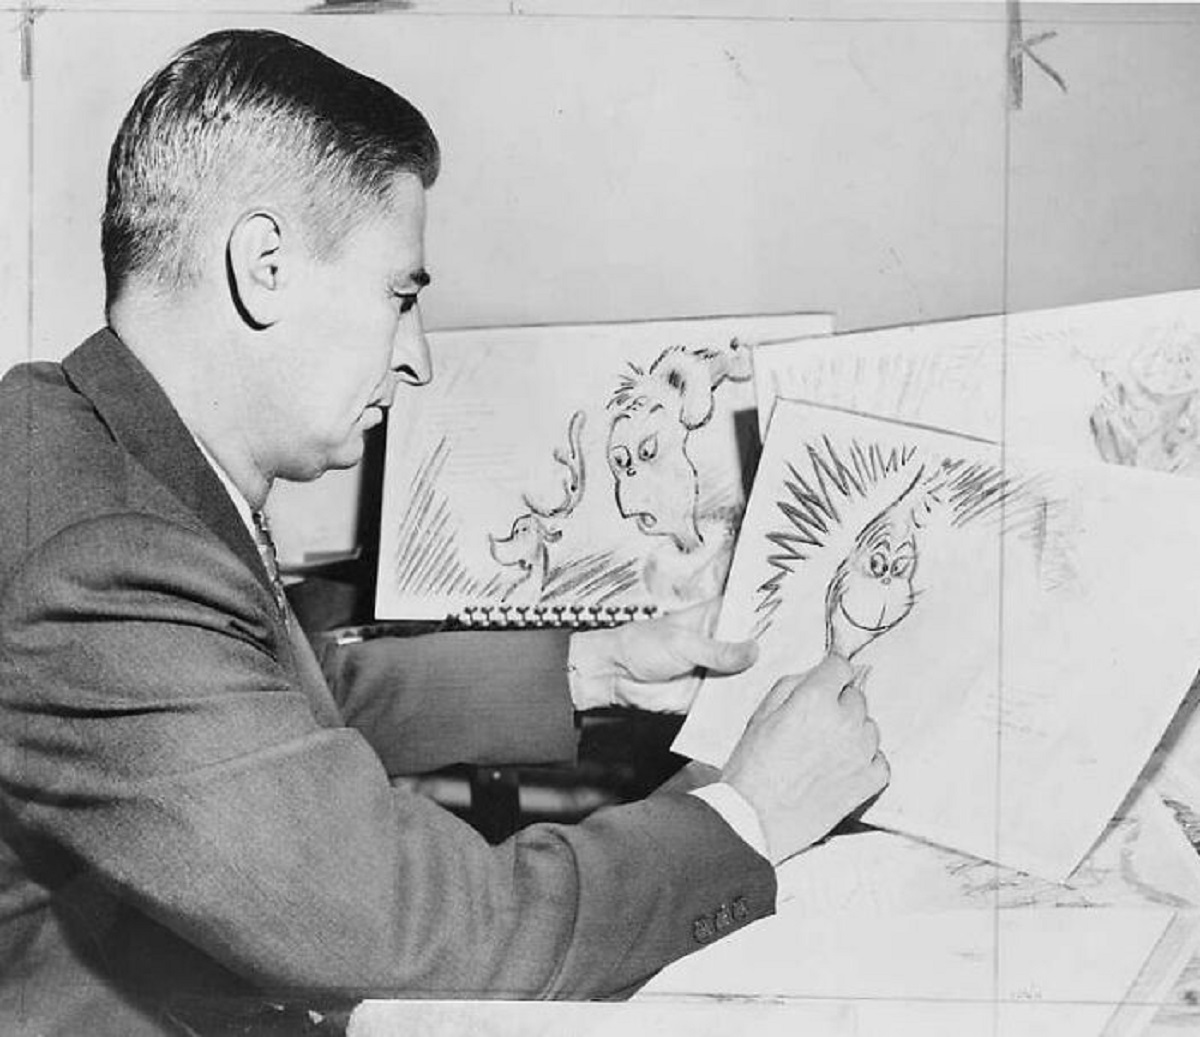 Dr. Seuss. Cheated on his wife while she was sick, which lead to her [self-harm] then married his affair partner the very next year.